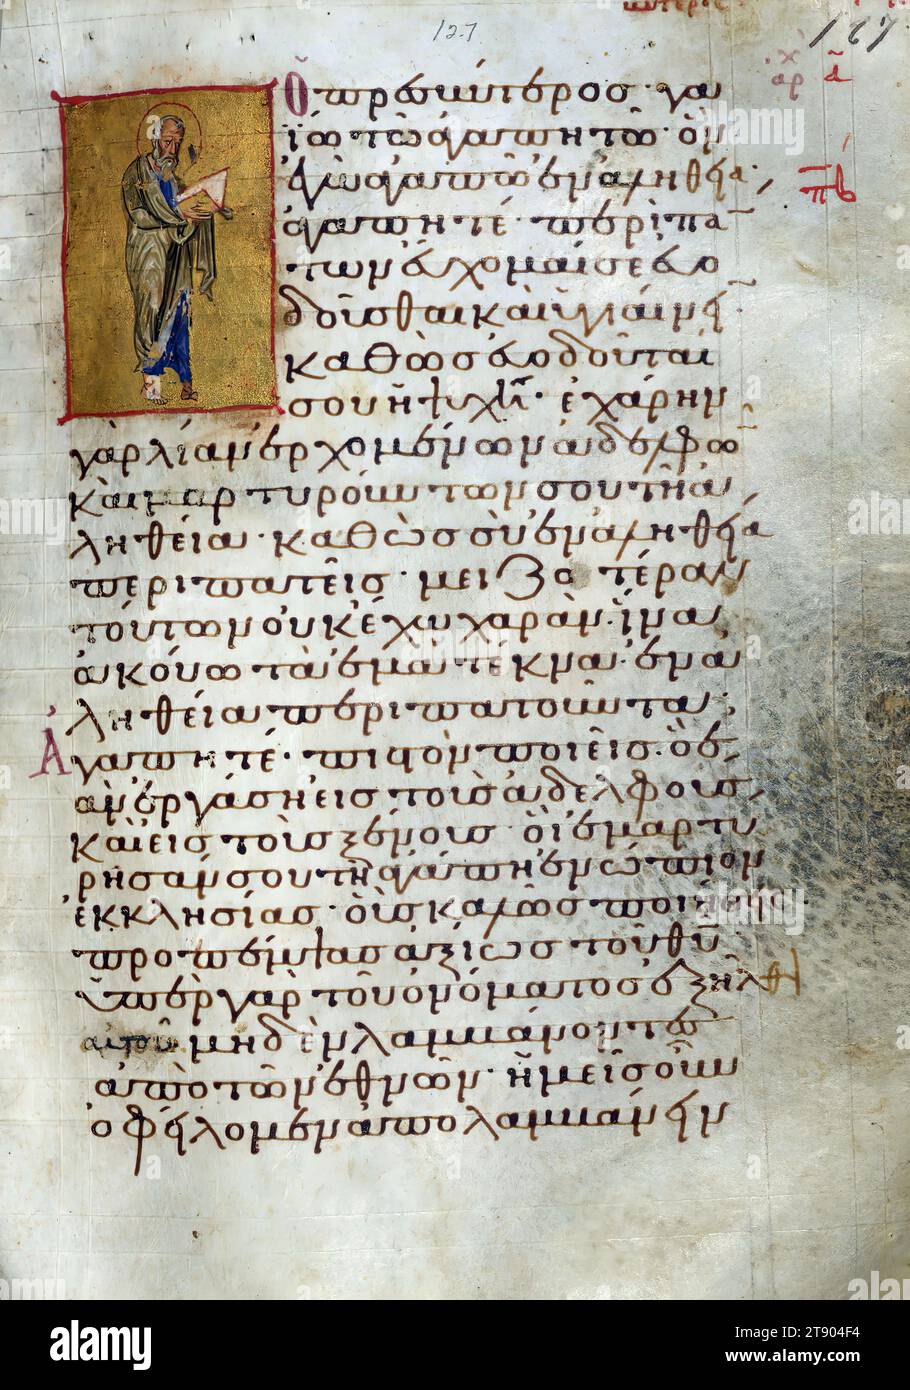 Acts and Epistles, Title page of the Third Epistle of John, This manuscript is one of the relatively few illustrated Byzantine copies of the Acts and Epistles of the Apostles. It consists of three parts produced at different dates: the New Testament text with its accompanying prefatory material (known as Euthalian apparatus, after the name of its supposed compiler Euthalius) was copied in the early twelfth century, then lists of readings were added at two stages, in the fourteenth and fifteenth centuries, to facilitate their use in church Stock Photo